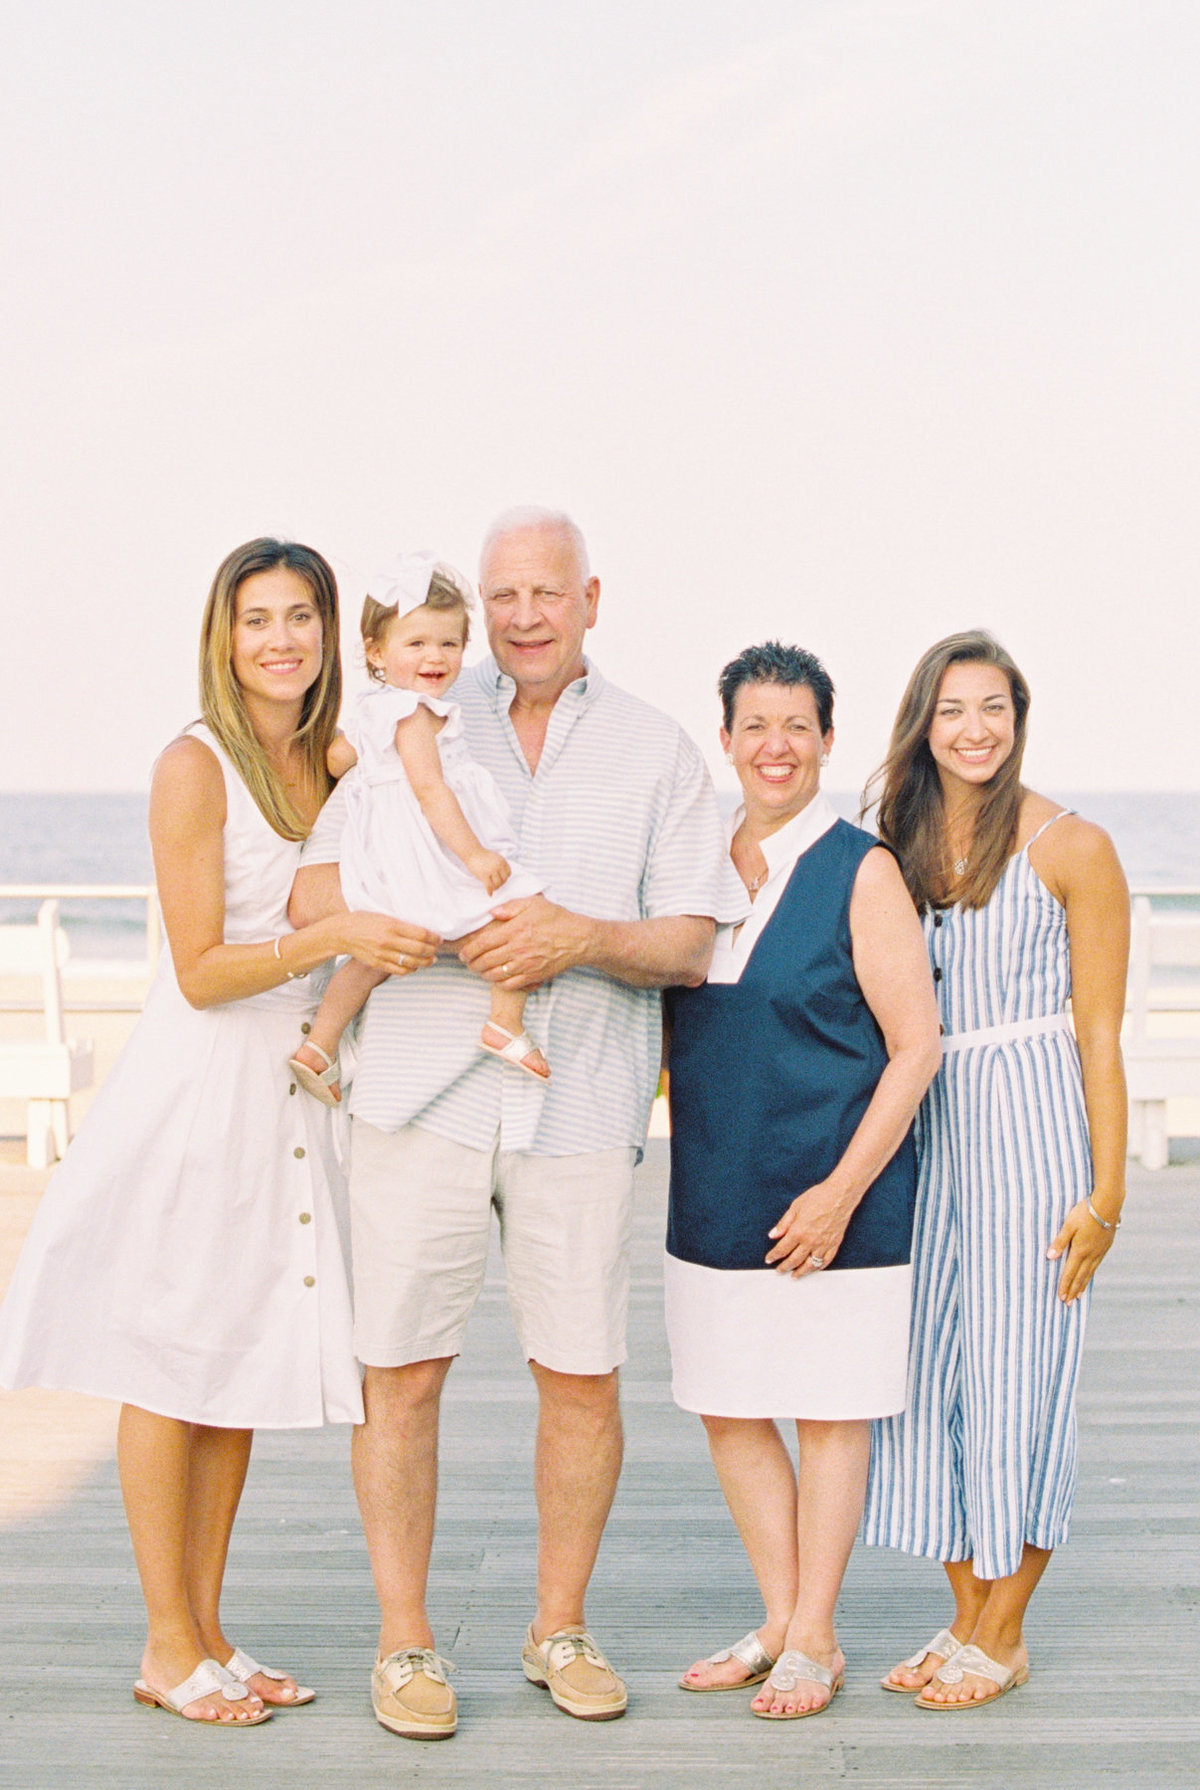 Michelle Behre Photography NJ Fine Art Photographer Seaside Family Lifestyle Family Portrait Session in Avon-by-the-Sea-109